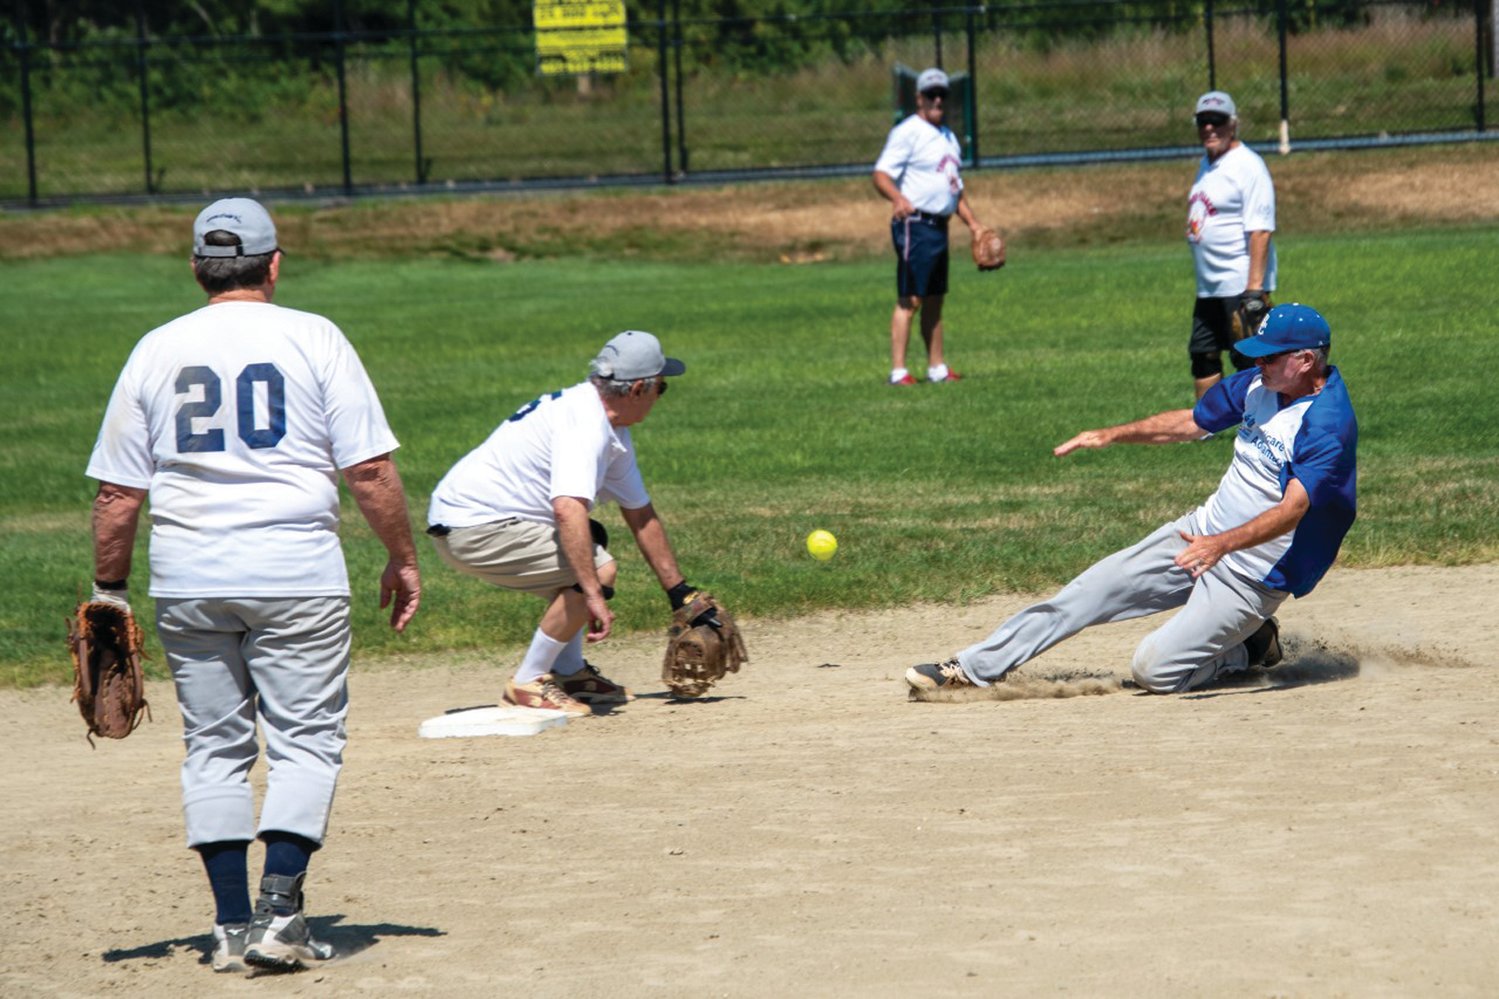 SLIDING IN: Don O’Leary slides into second base. (Submitted photos)